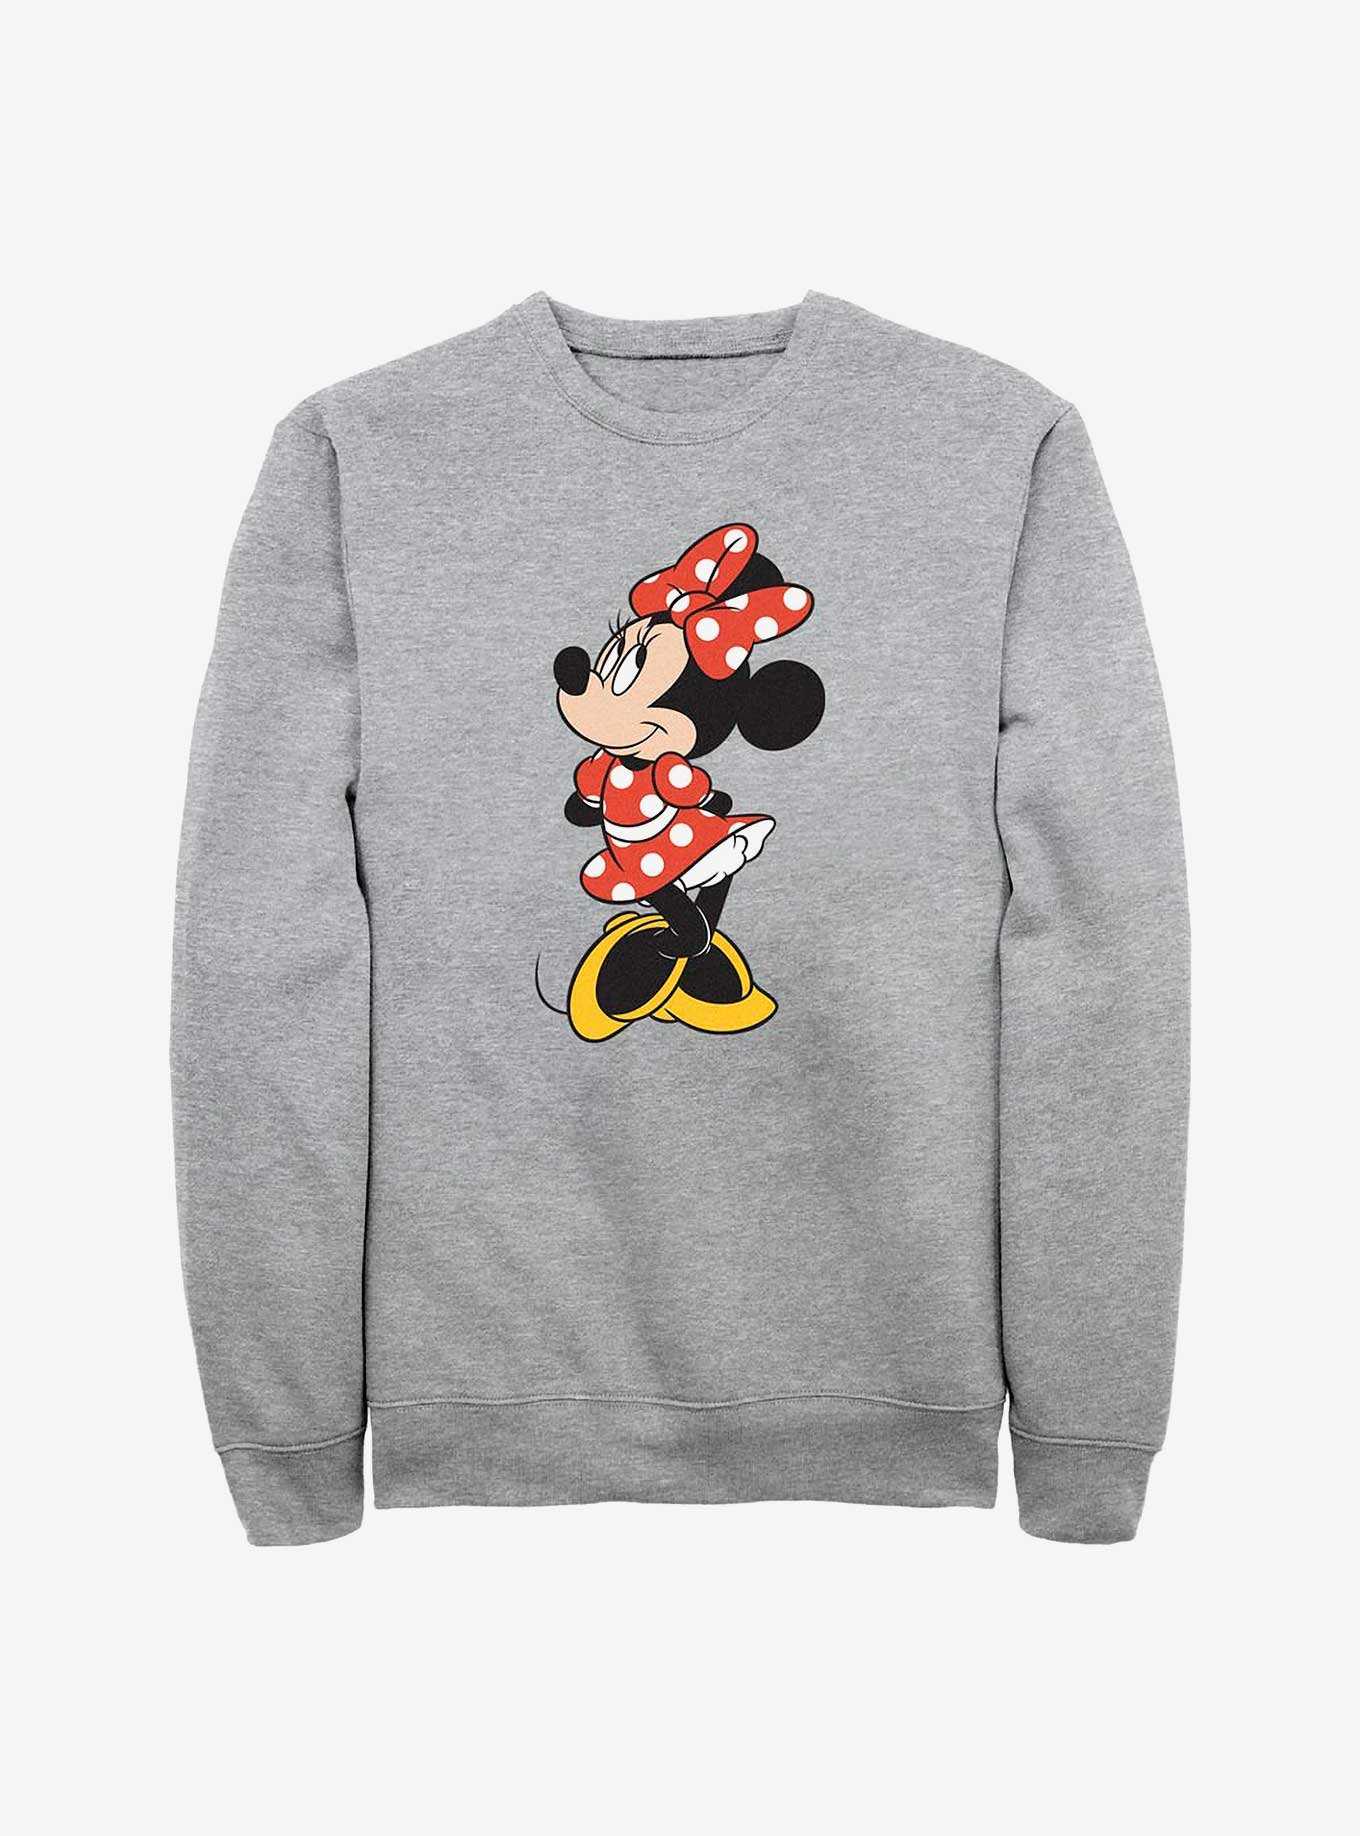 OFFICIAL Minnie Mouse Shirts & Merchandise Hot | Topic